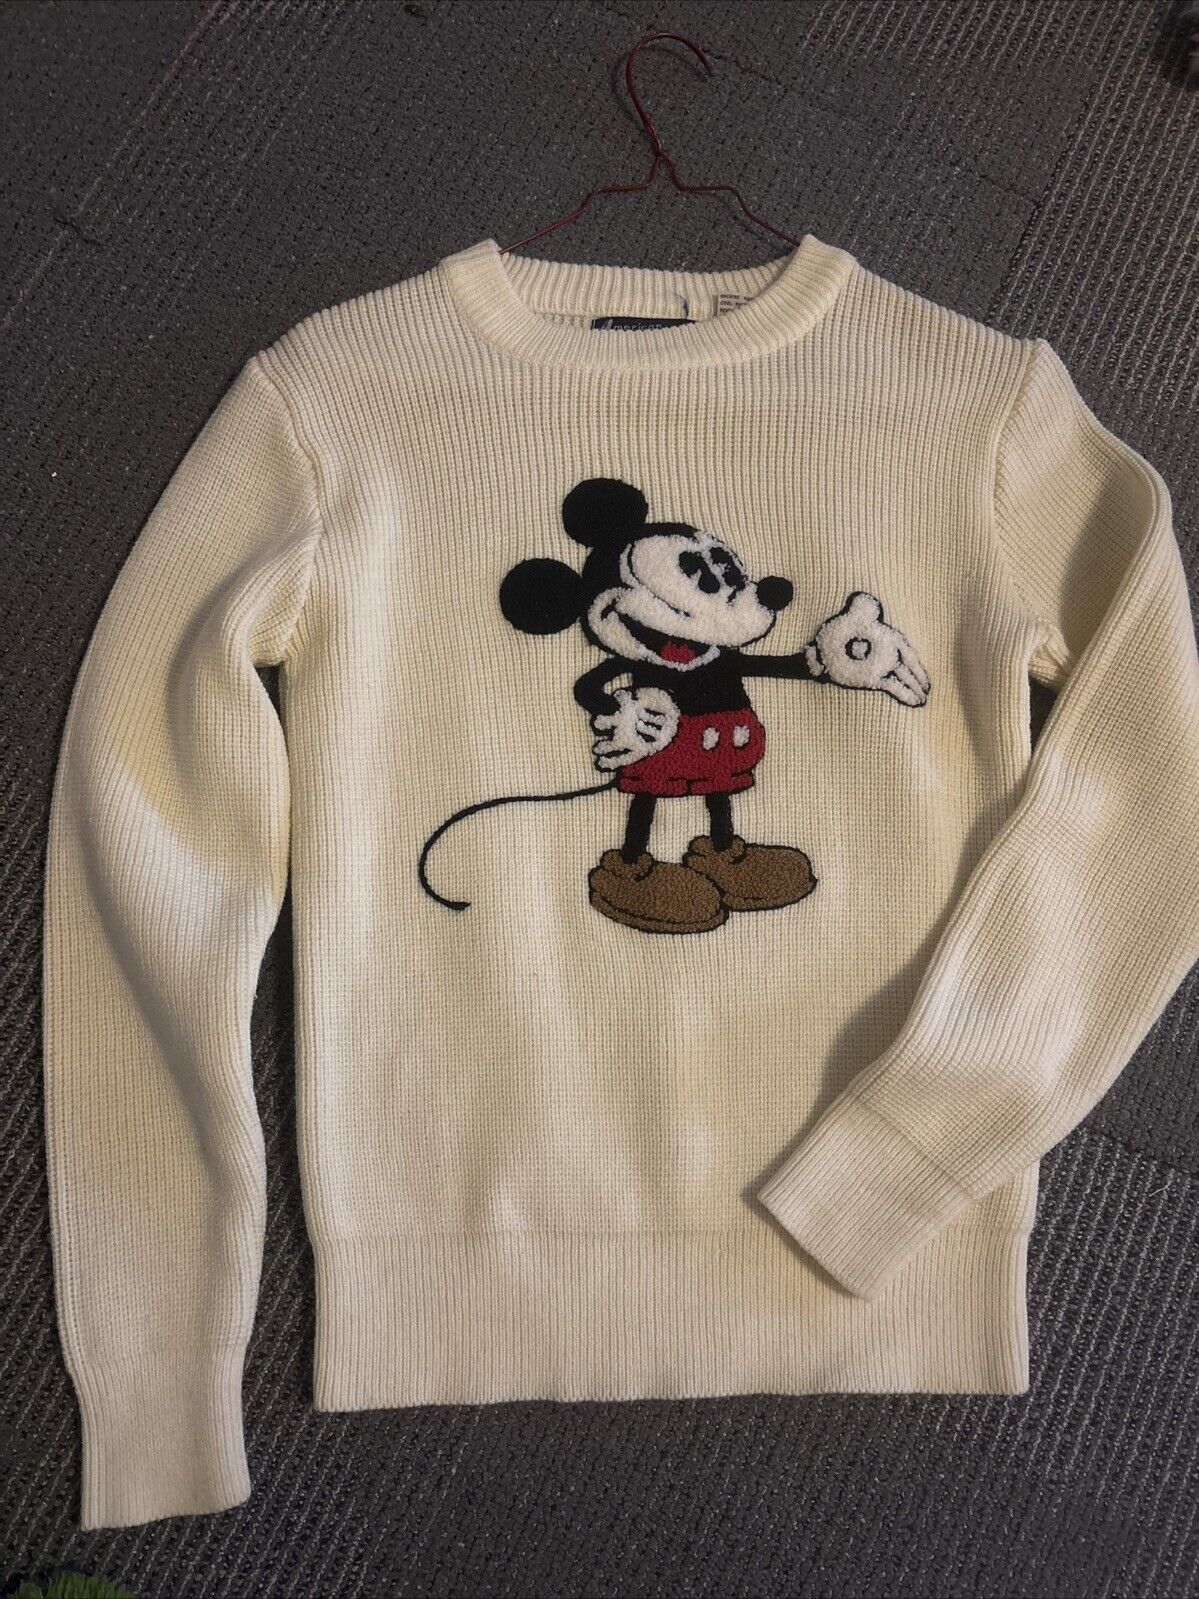 Vintage Walt Disney Production Mickey Sweater American Characters 